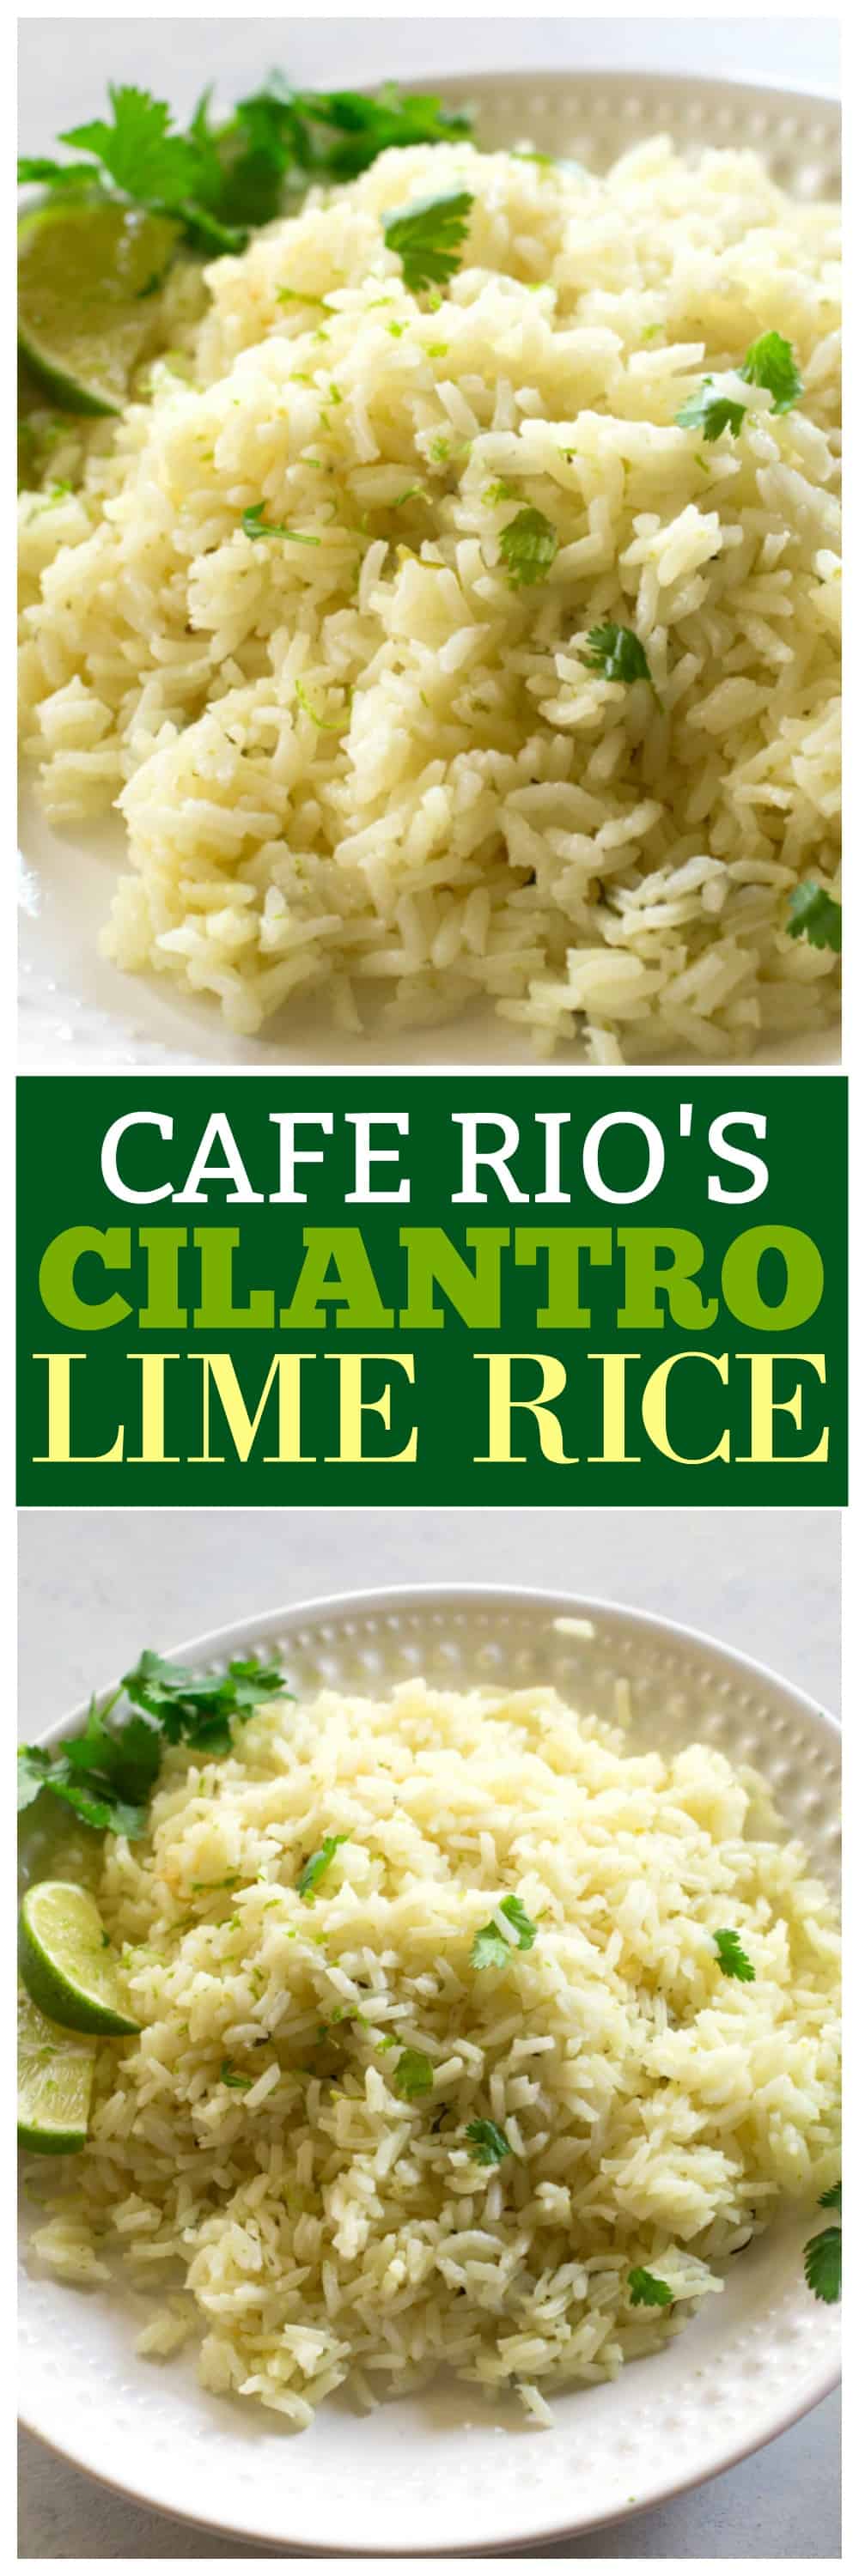 Cilantro Lime Rice from Cafe Rio - The Girl Who Ate Everything